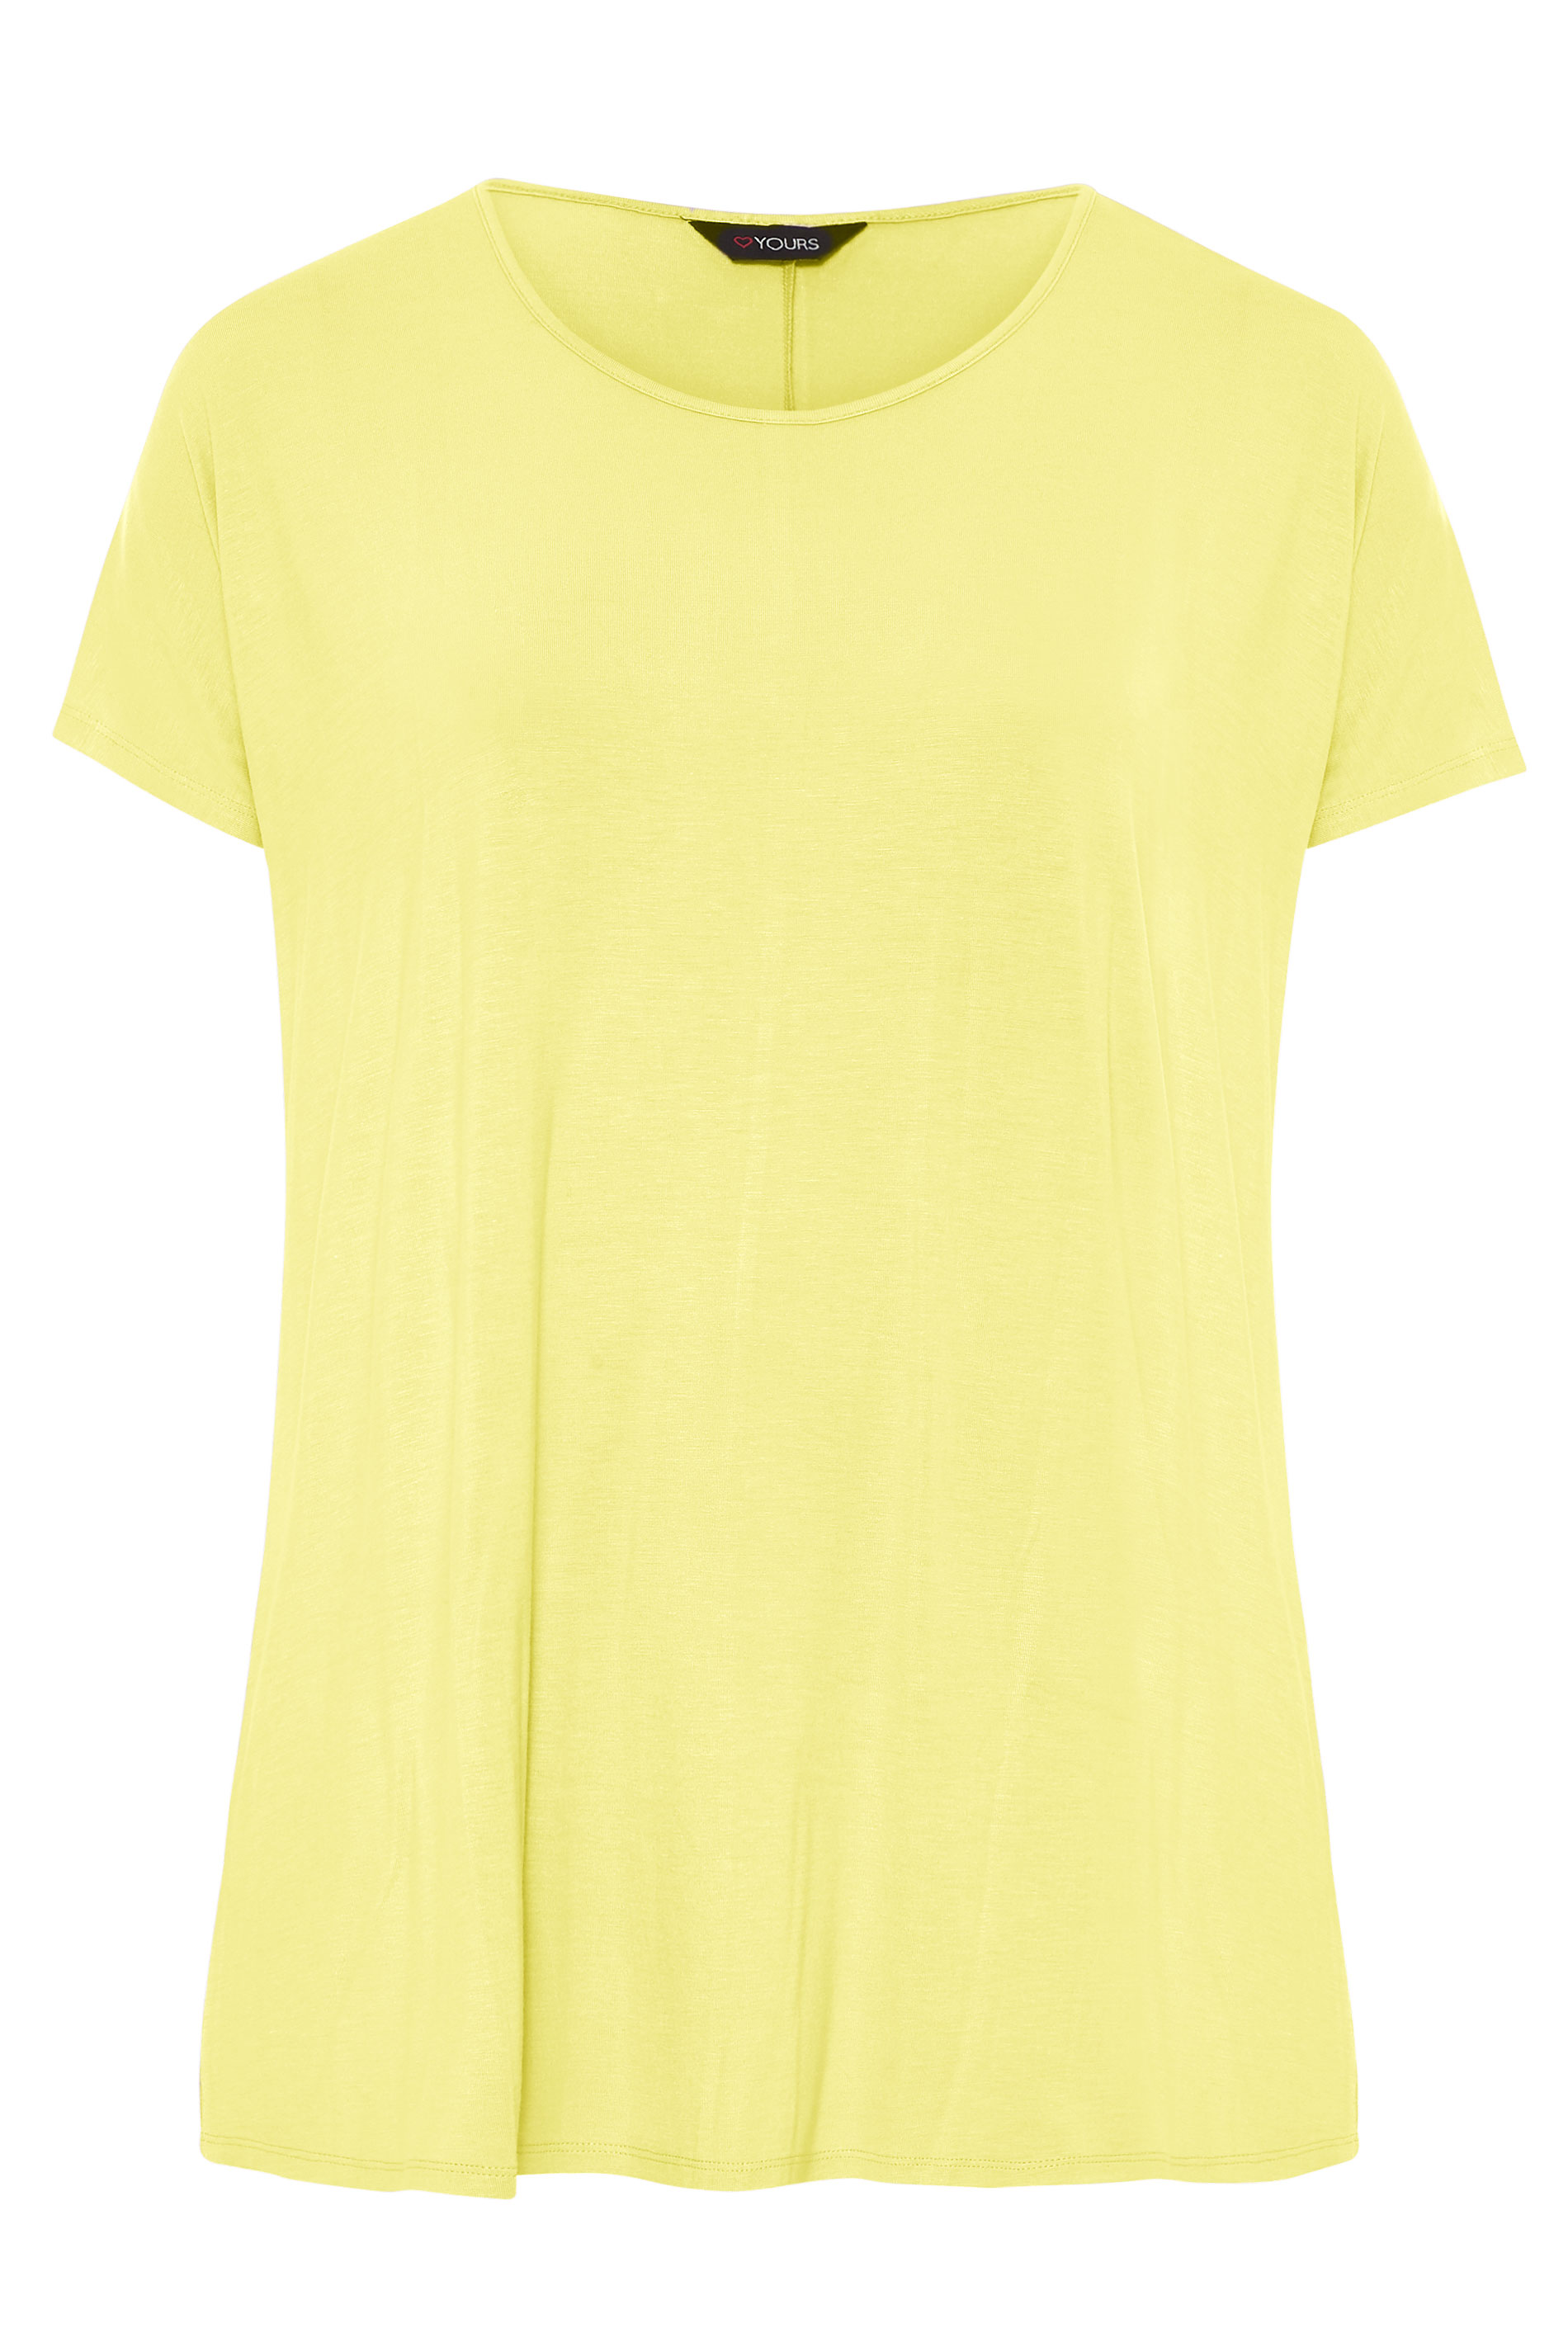 Lemon Yellow Grown on Sleeve T-Shirt | Yours Clothing